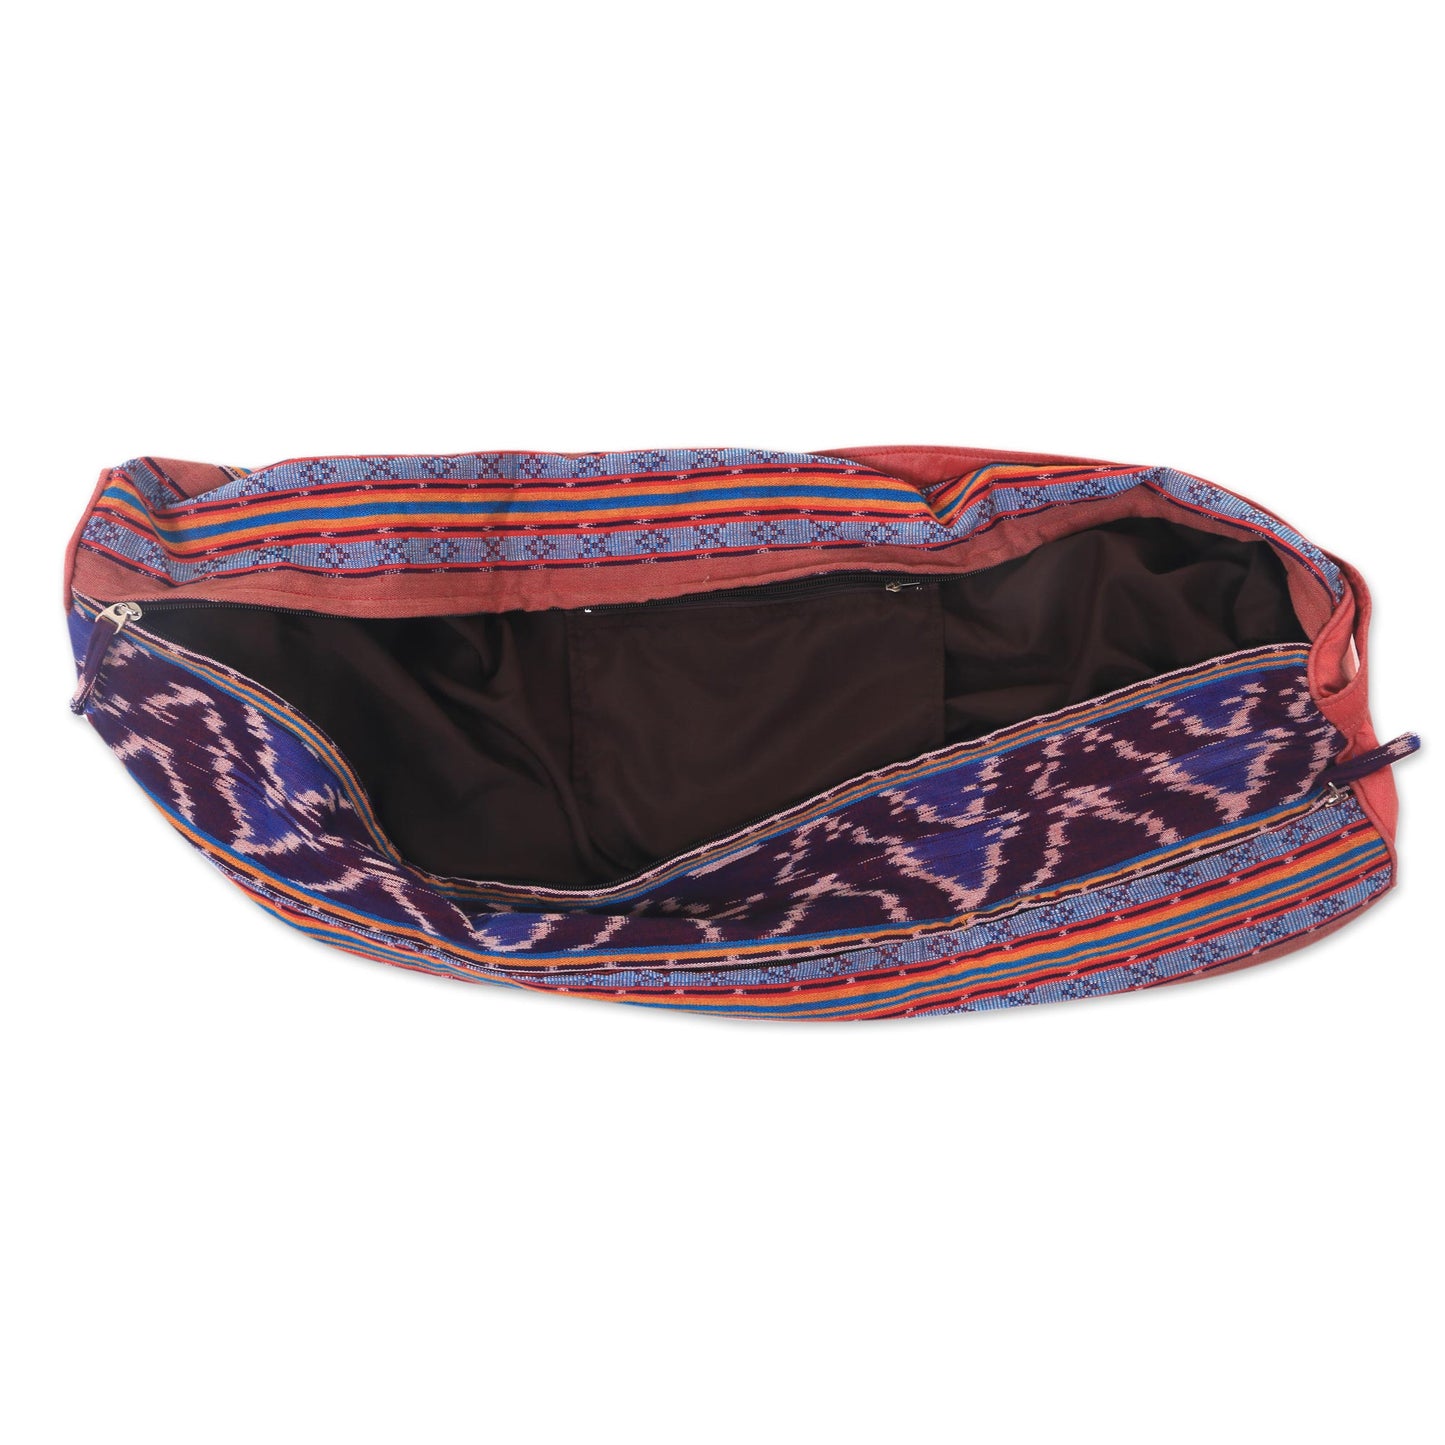 Troso Dusk 100% Hand Woven Cotton Lined Yoga Bag with One Inner Pocket